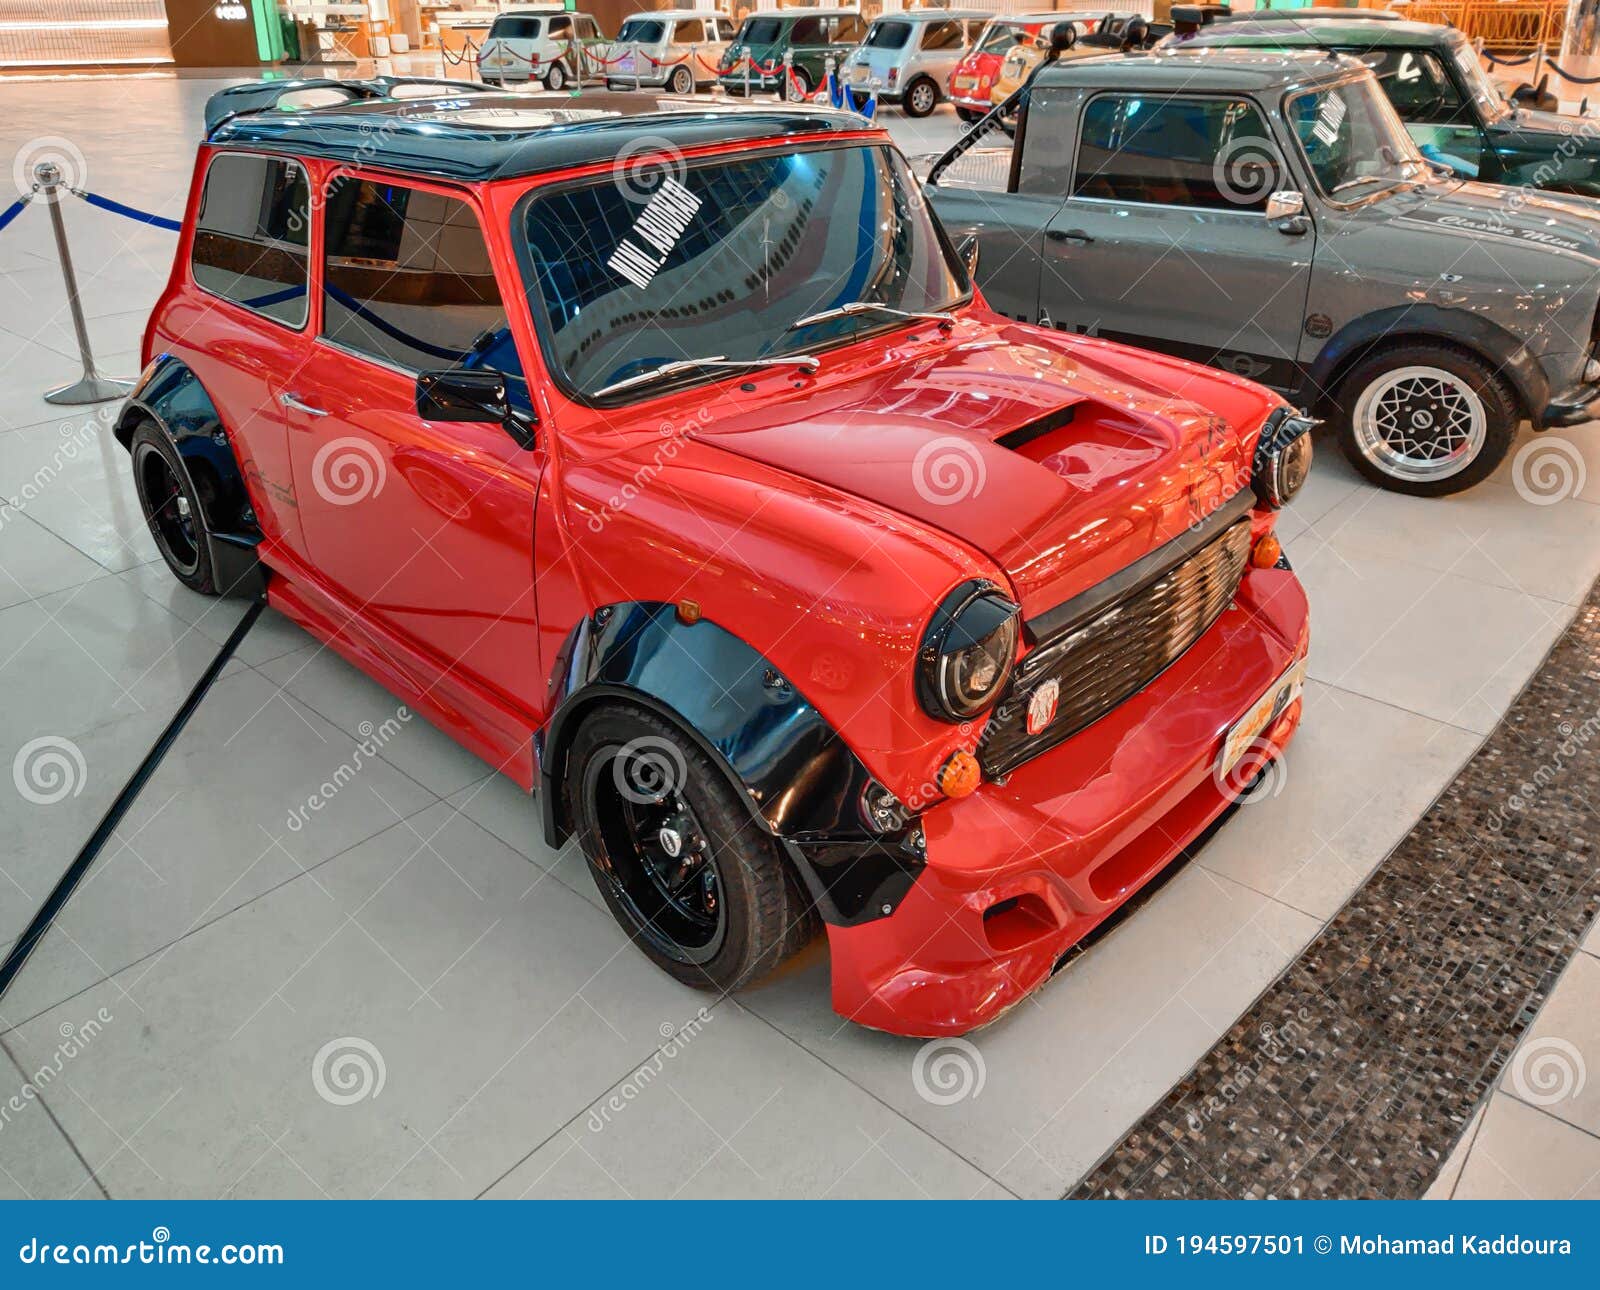 Modified and Unique Mini Cooper S Turbo Displayed in a Show | Cool and ...